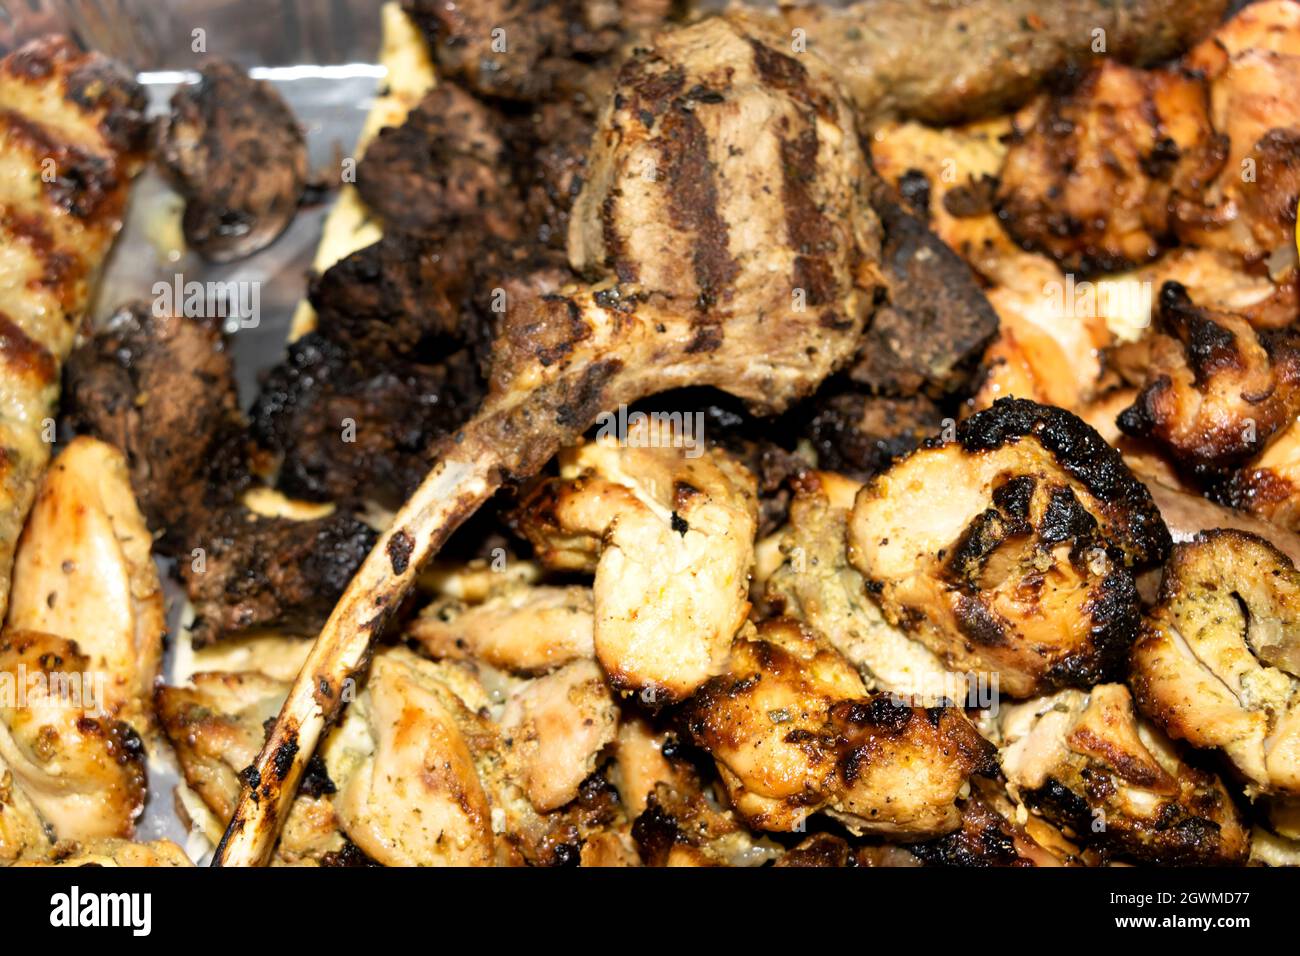 Closeup Image Of Middle East Style Grilled Chicken And Mutton Kabobs. Selective Focus Stock Photo